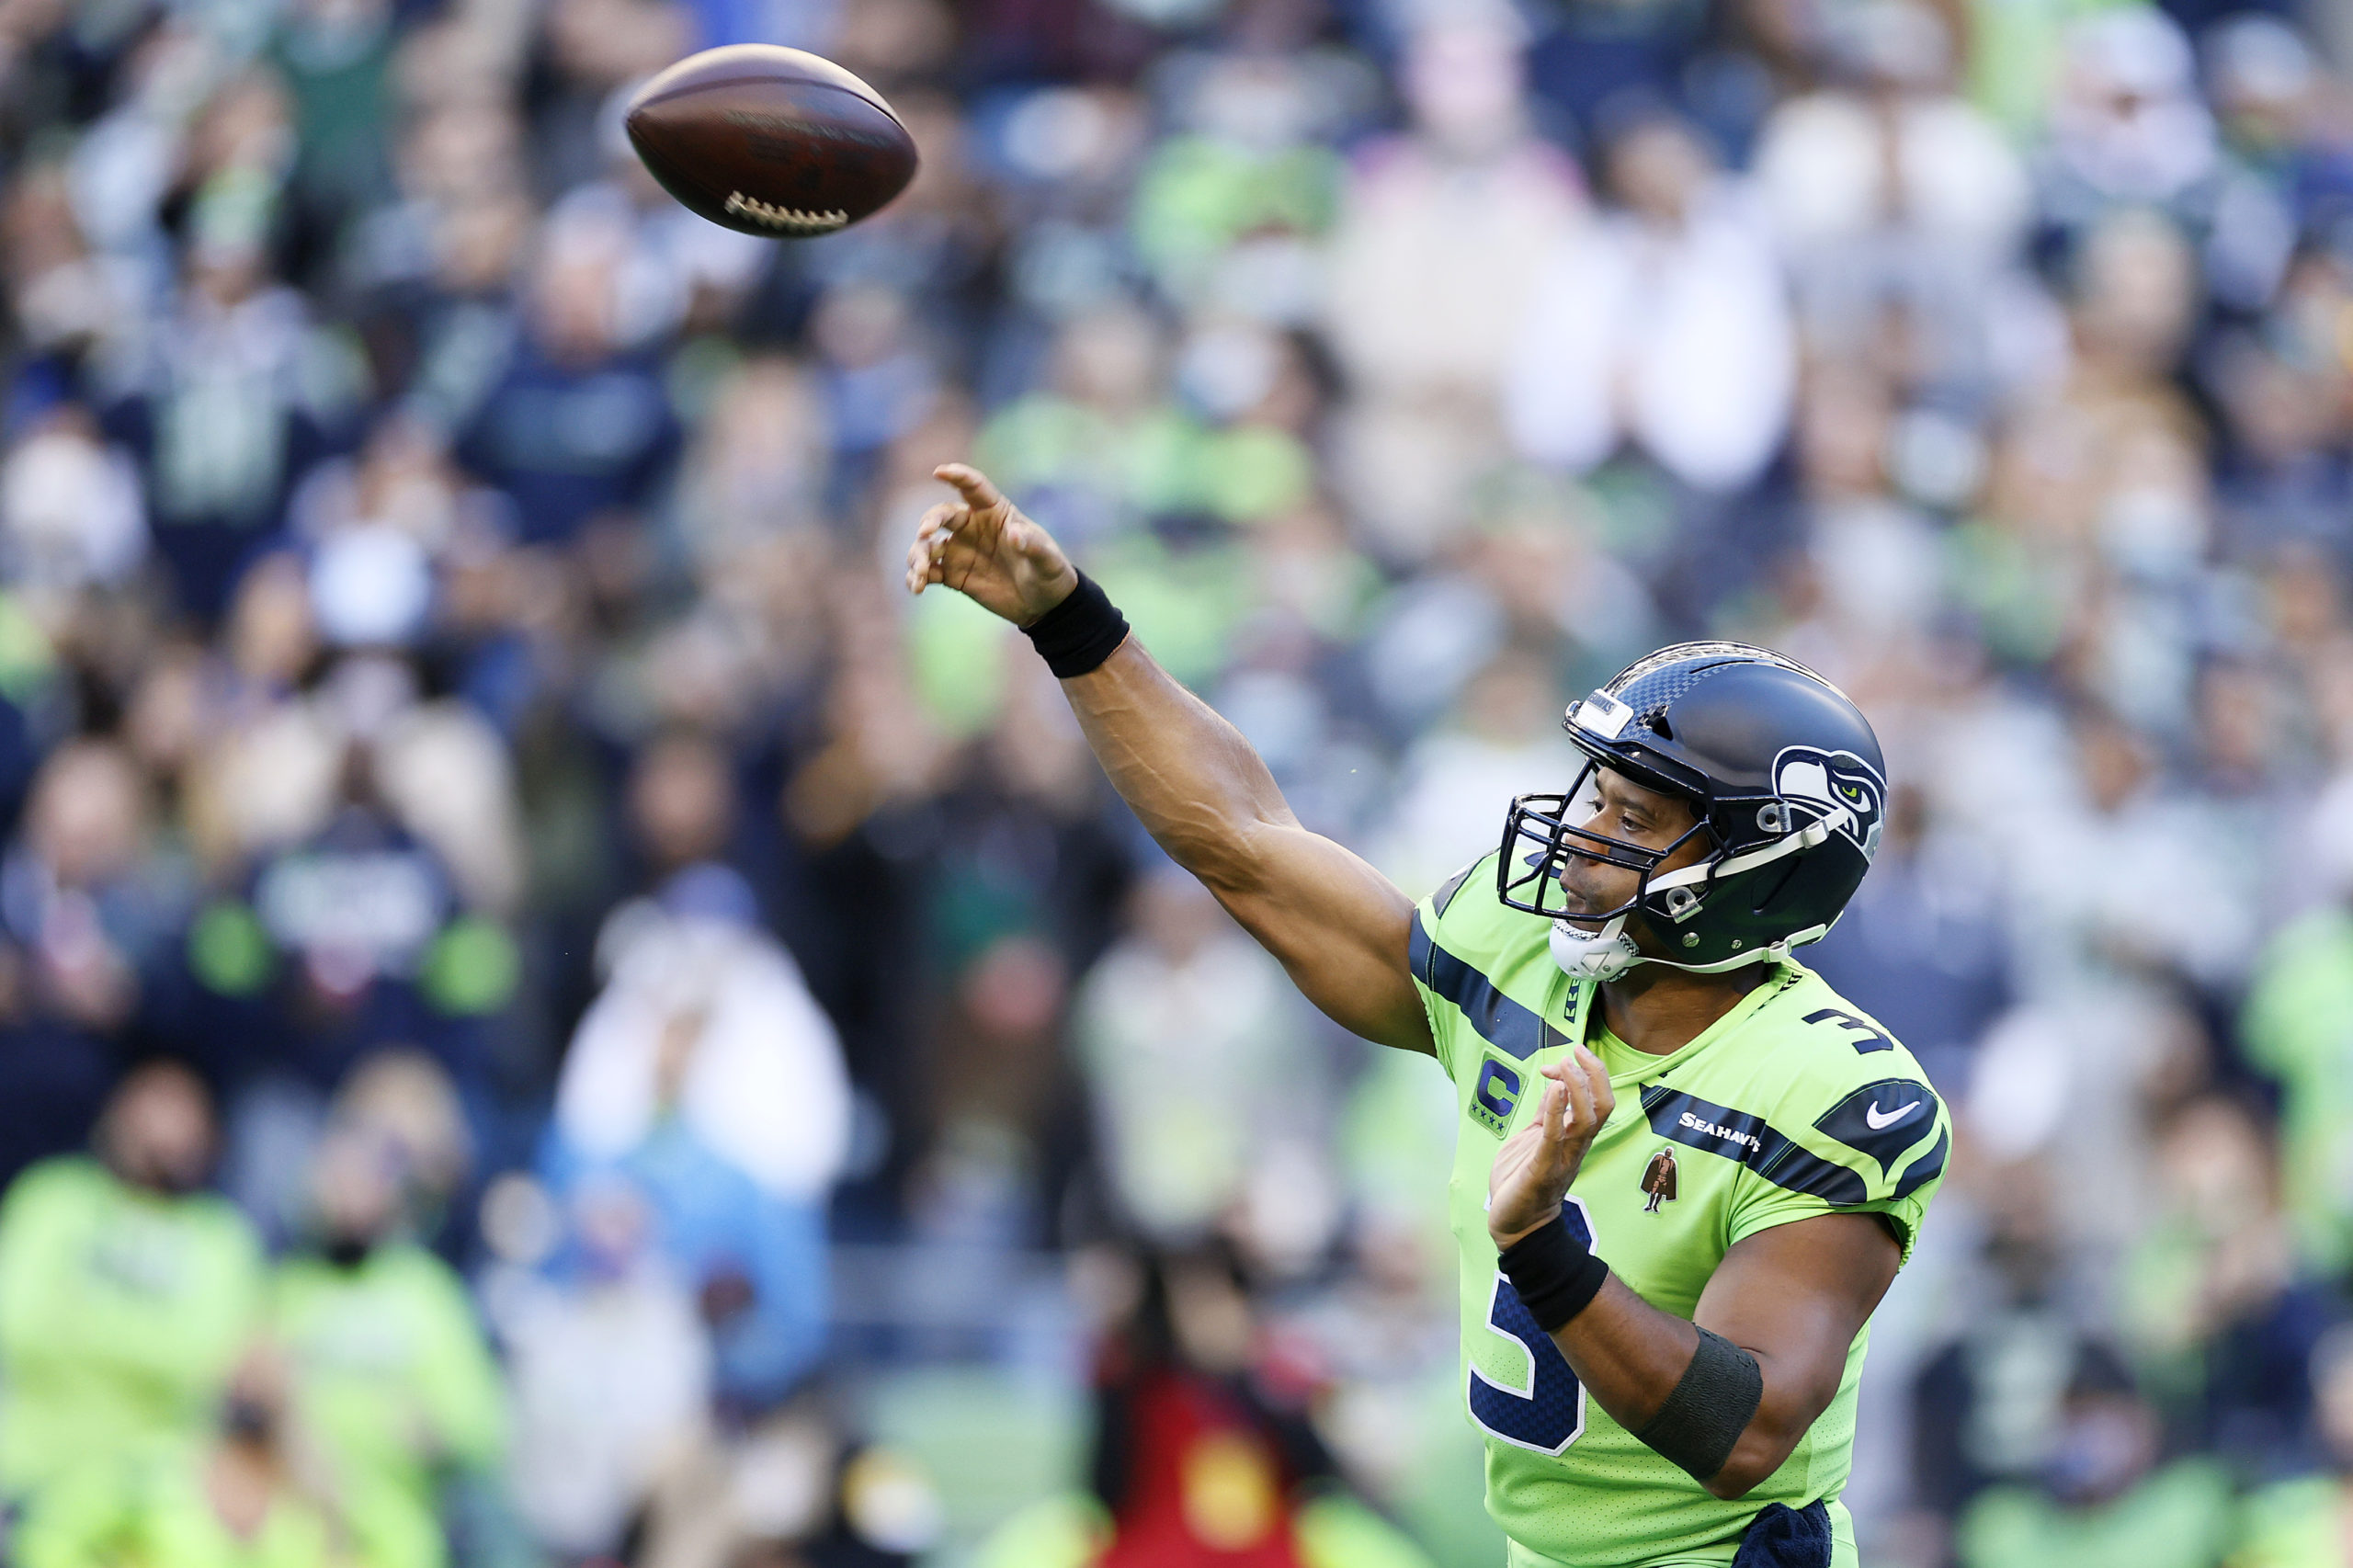 SEATTLE, WASHINGTON - OCTOBER 07: Quarterback Russell Wilson #3 of the Seattle Seahawks passes against the Los Angeles Rams in the first half at Lumen Field on October 07, 2021 in Seattle, Washington. Steph Chambers/Getty Images